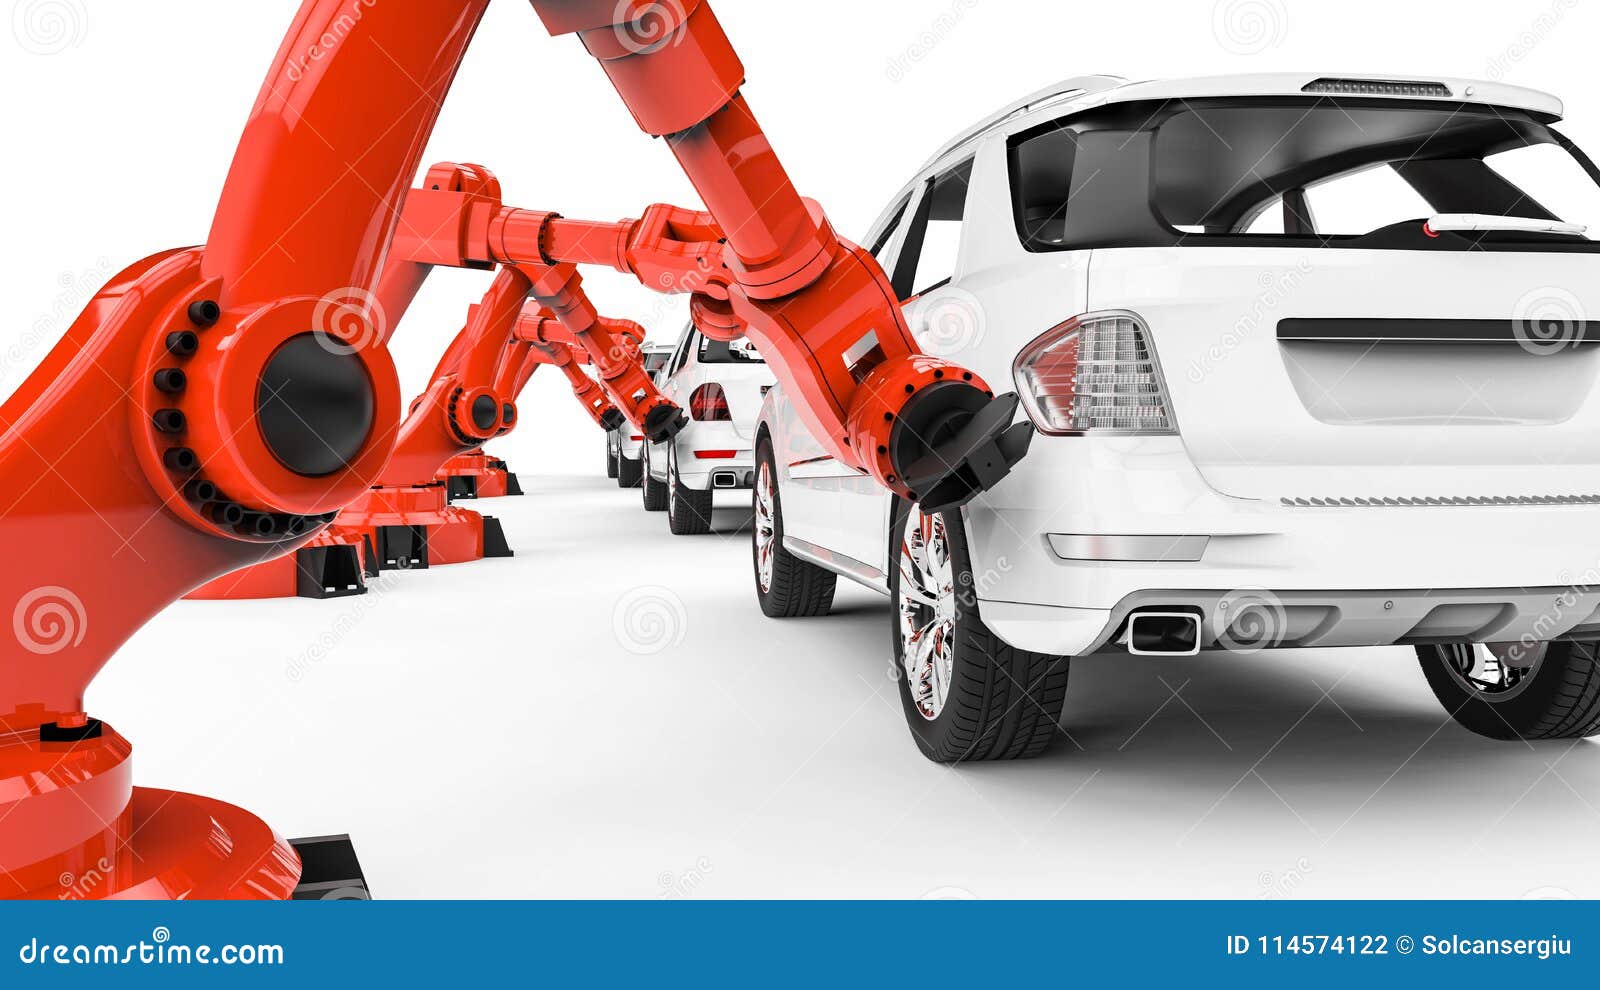 Automotive robots in a factory line. 3D render image representing a factory line with automotive robots and cars